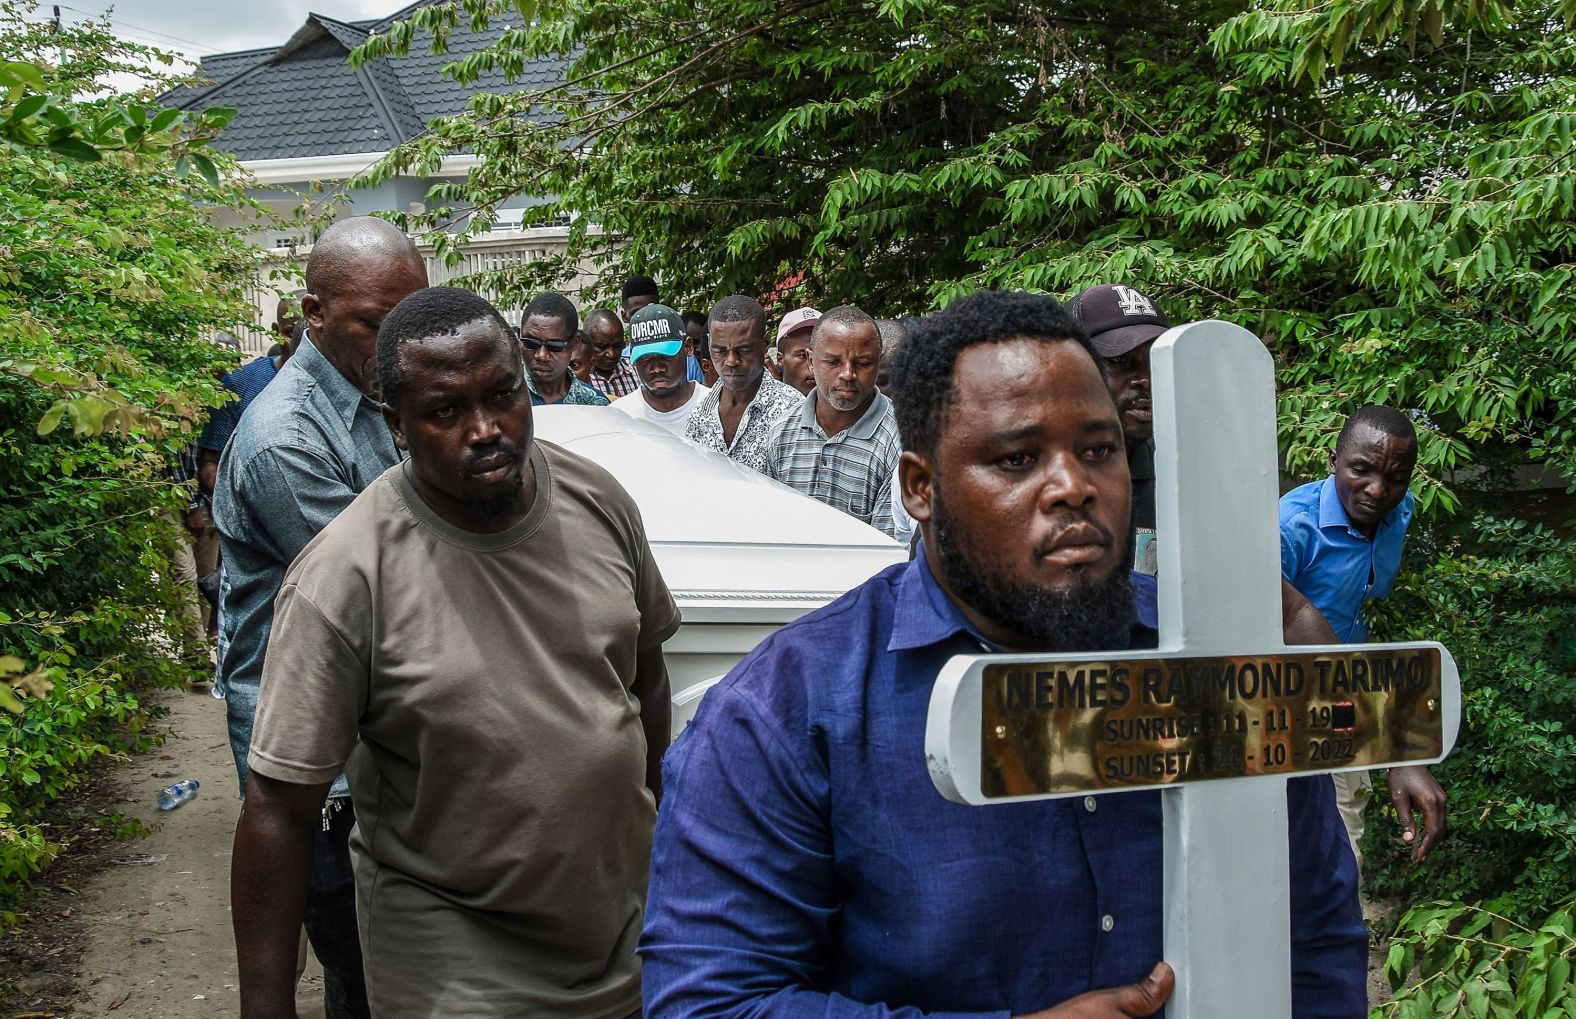 Mourners in Dar es Salaam, Tanzania, carry the body of Nemes Tarimo, a Tanzanian national who was killed fighting for Russia in Ukraine, during a funeral ceremony on Friday, January 27. <a href="index.php?page=&url=https%3A%2F%2Fwww.cnn.com%2F2023%2F01%2F25%2Fafrica%2Flemekani-nyirenda-buried-zambia-intl%2Findex.html" target="_blank">Tarimo was killed in October</a> while fighting with the Russian mercenary group Wagner in exchange for money and amnesty, his country's foreign ministry said in a statement. The ministry said Tarimo was studying in Moscow before he was sent to jail on undisclosed criminal charges.